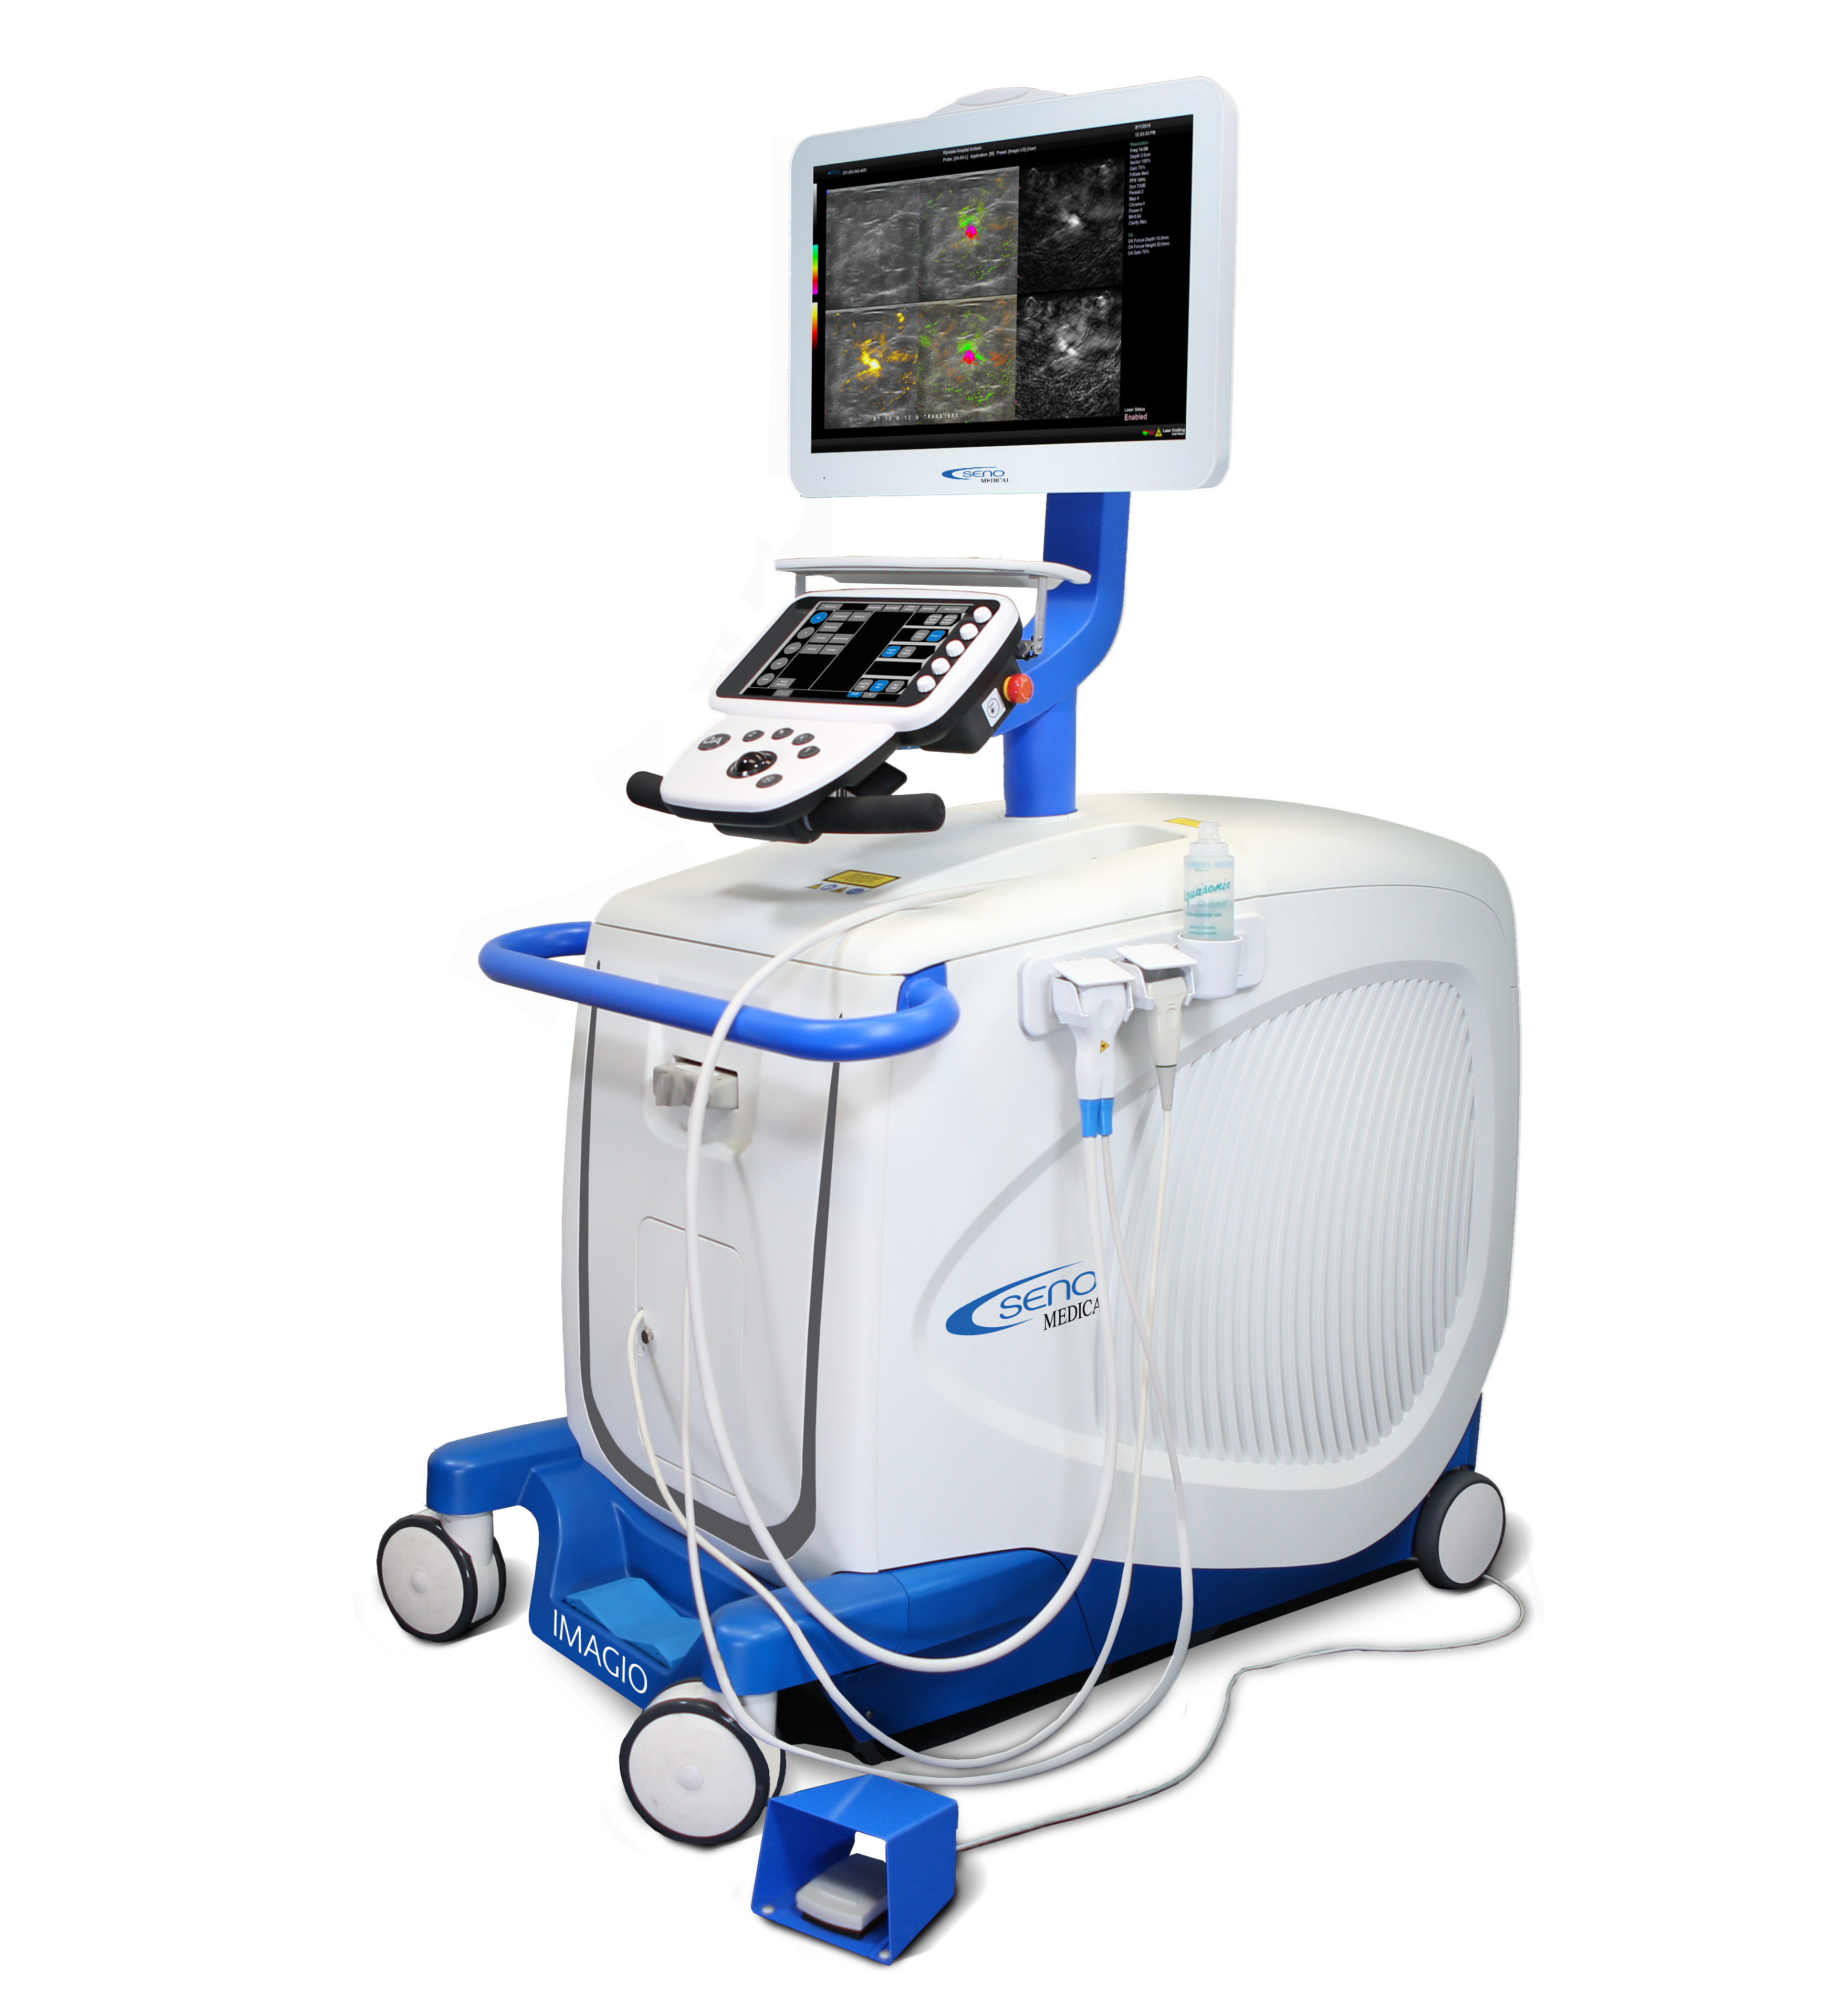 The Imagio®  Breast Imaging System